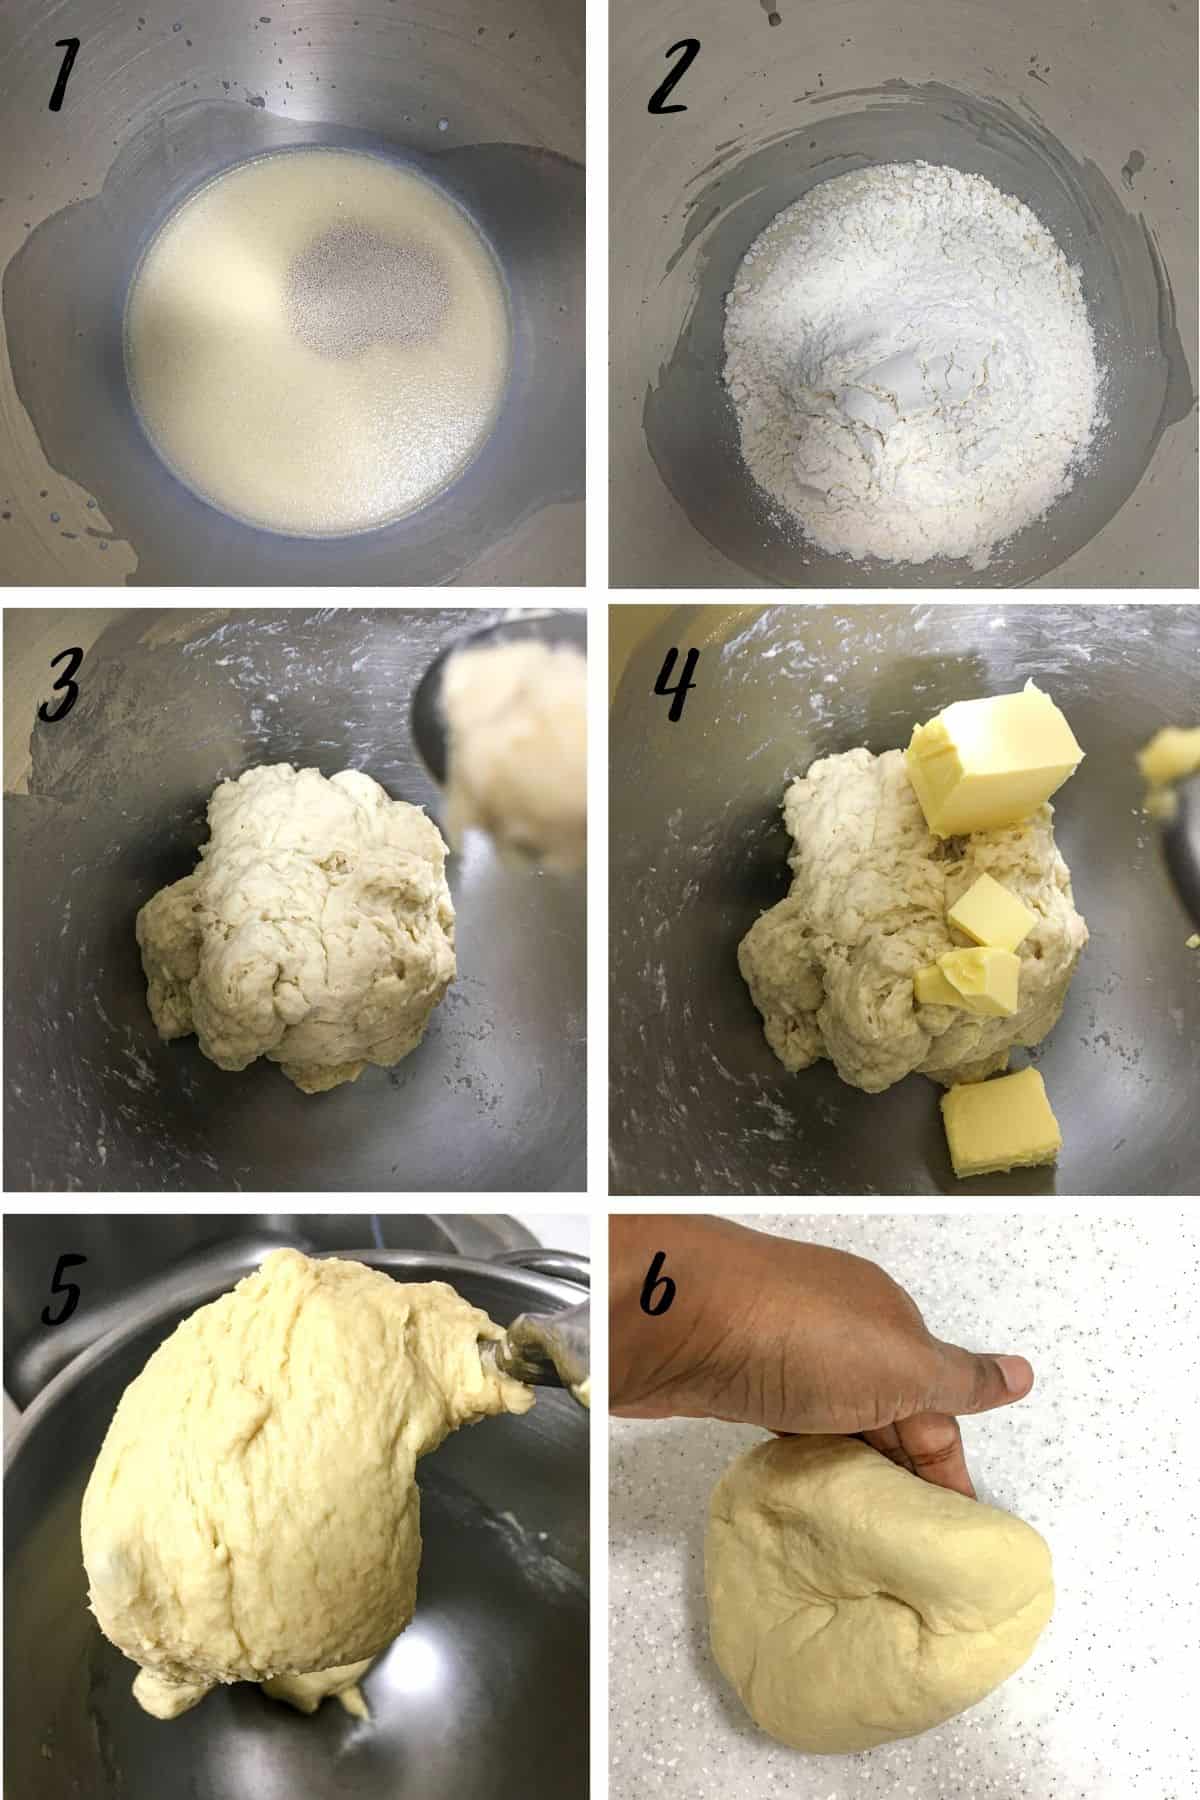 A poster of 6 images showing how to knead dough